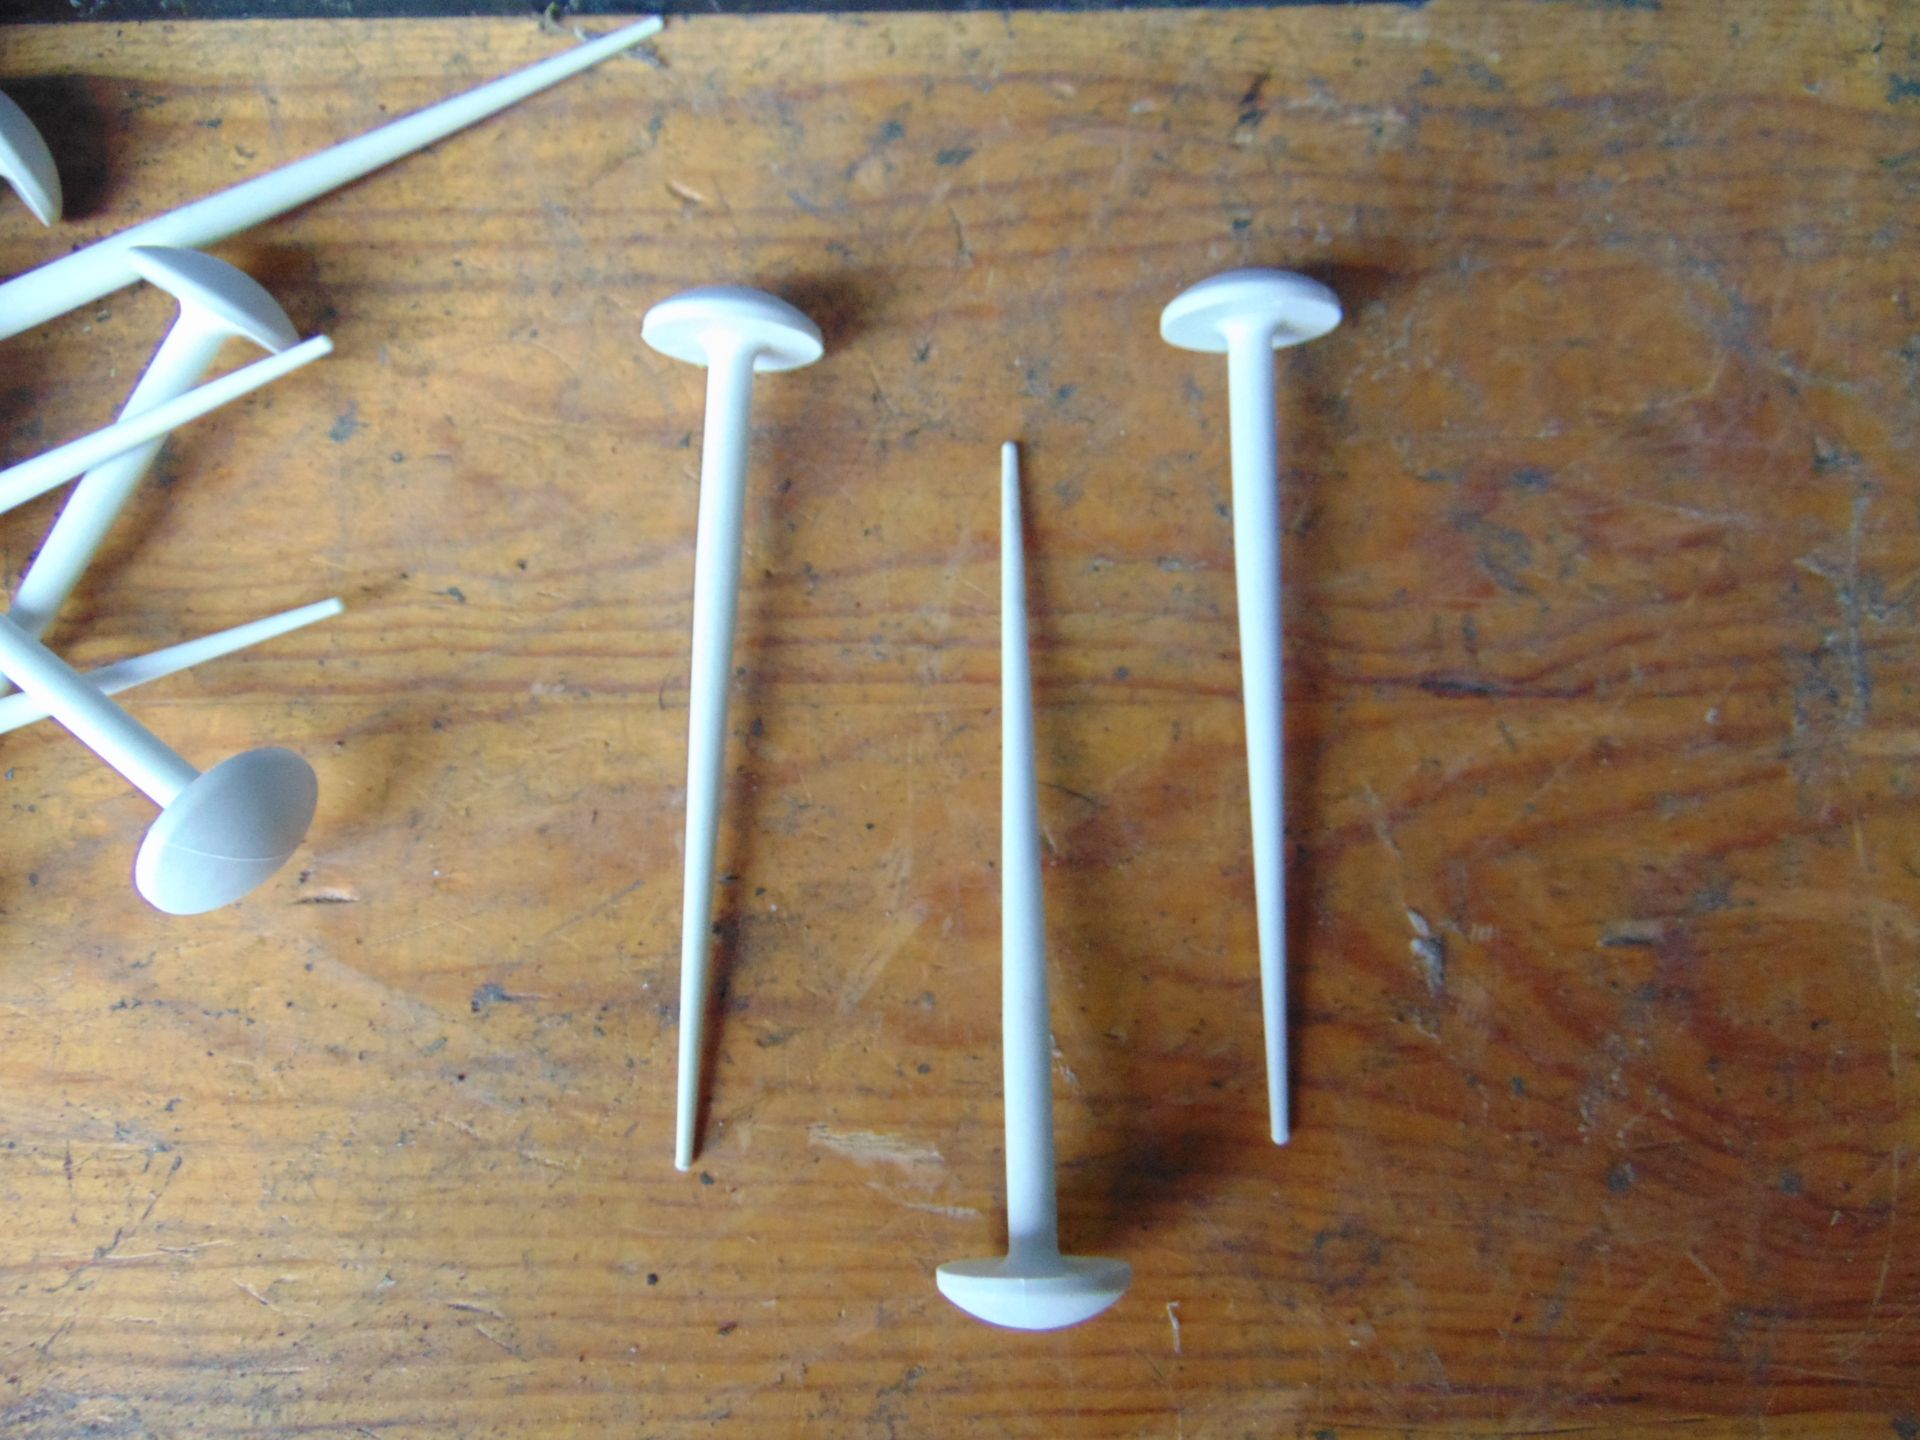 New Unissued Approx. 1000 White Plastic Ground Marking Spikes - Image 3 of 4